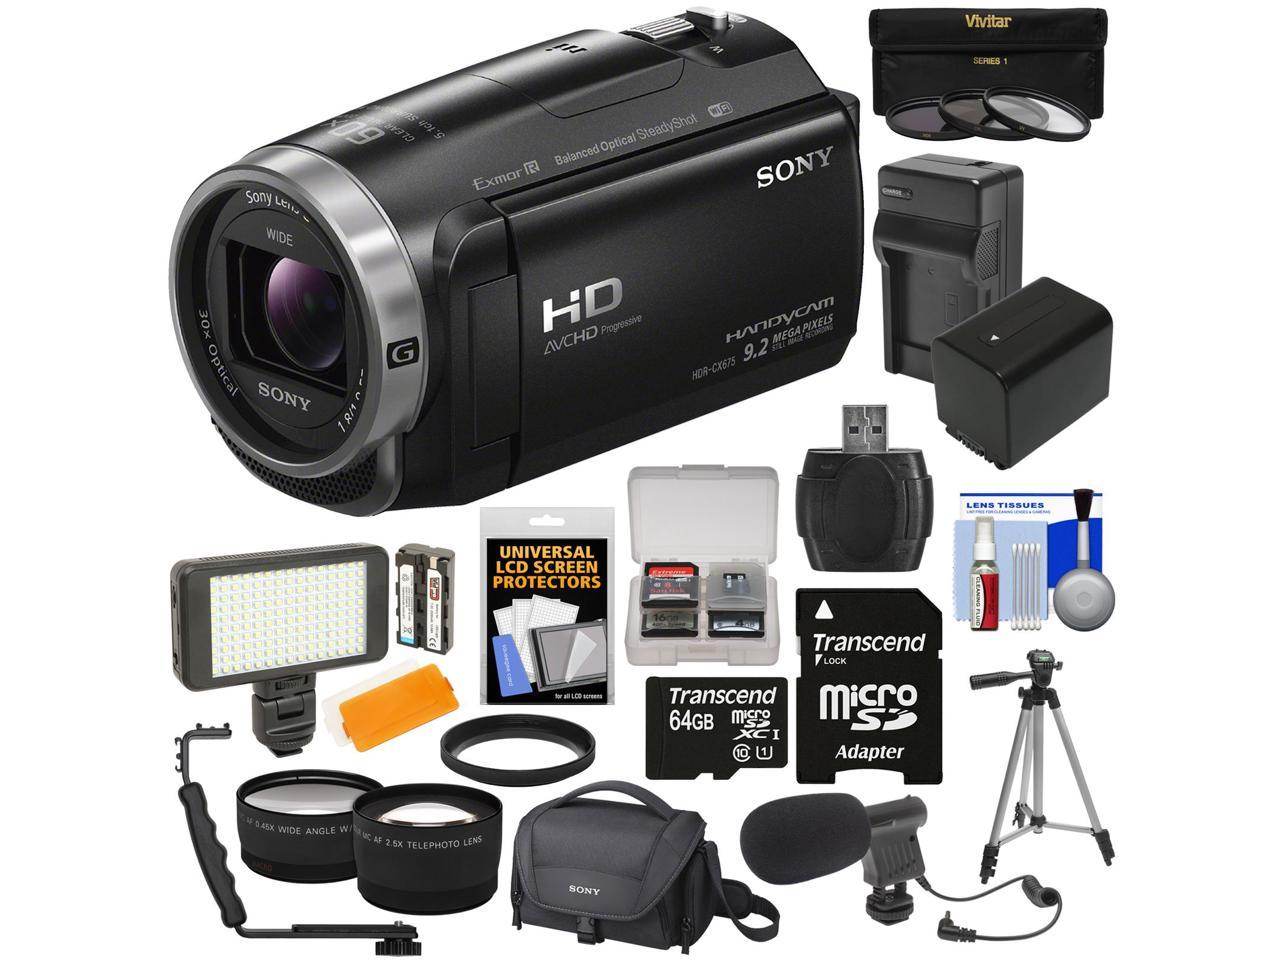 Sony Handycam HDR-CX675 32GB Wi-Fi HD Video Camera Camcorder with 64GB Card + Battery & Charger + Case + Tripod + LED Light + Mic + Tele/Wide Lens Kit